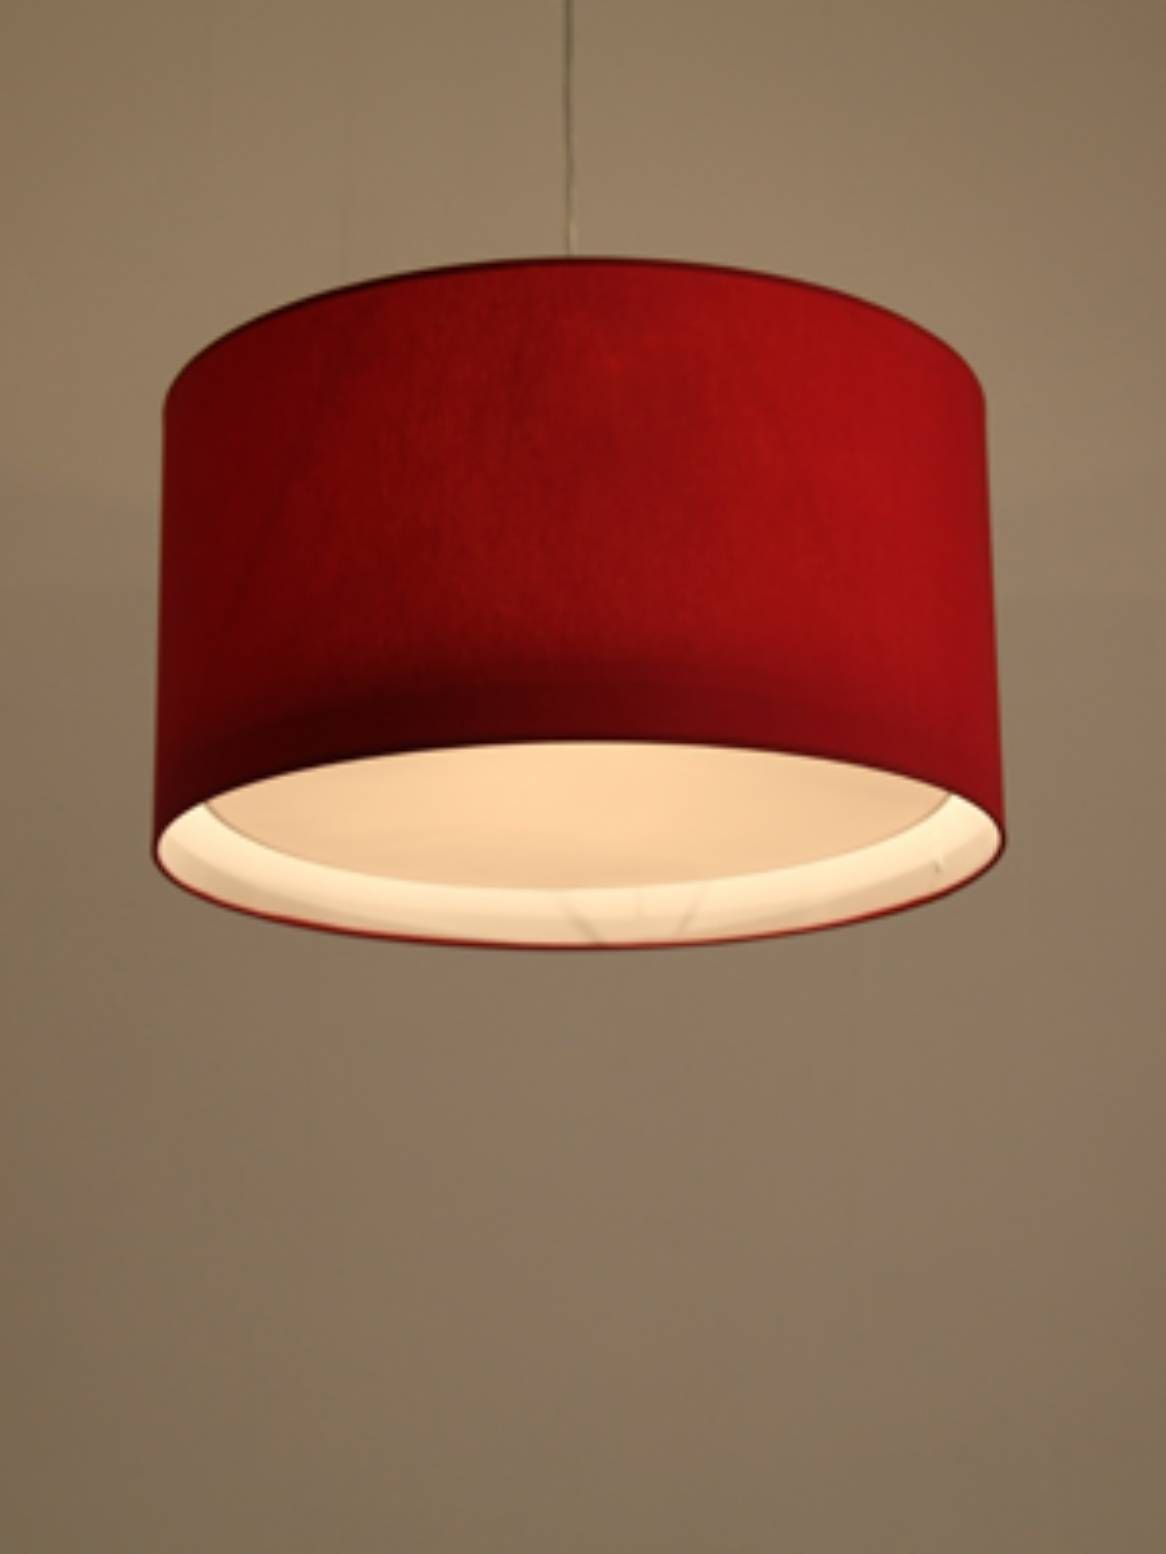 Red Drum Pendant With White Diffuser For Red Drum Pendant Lights (View 4 of 15)